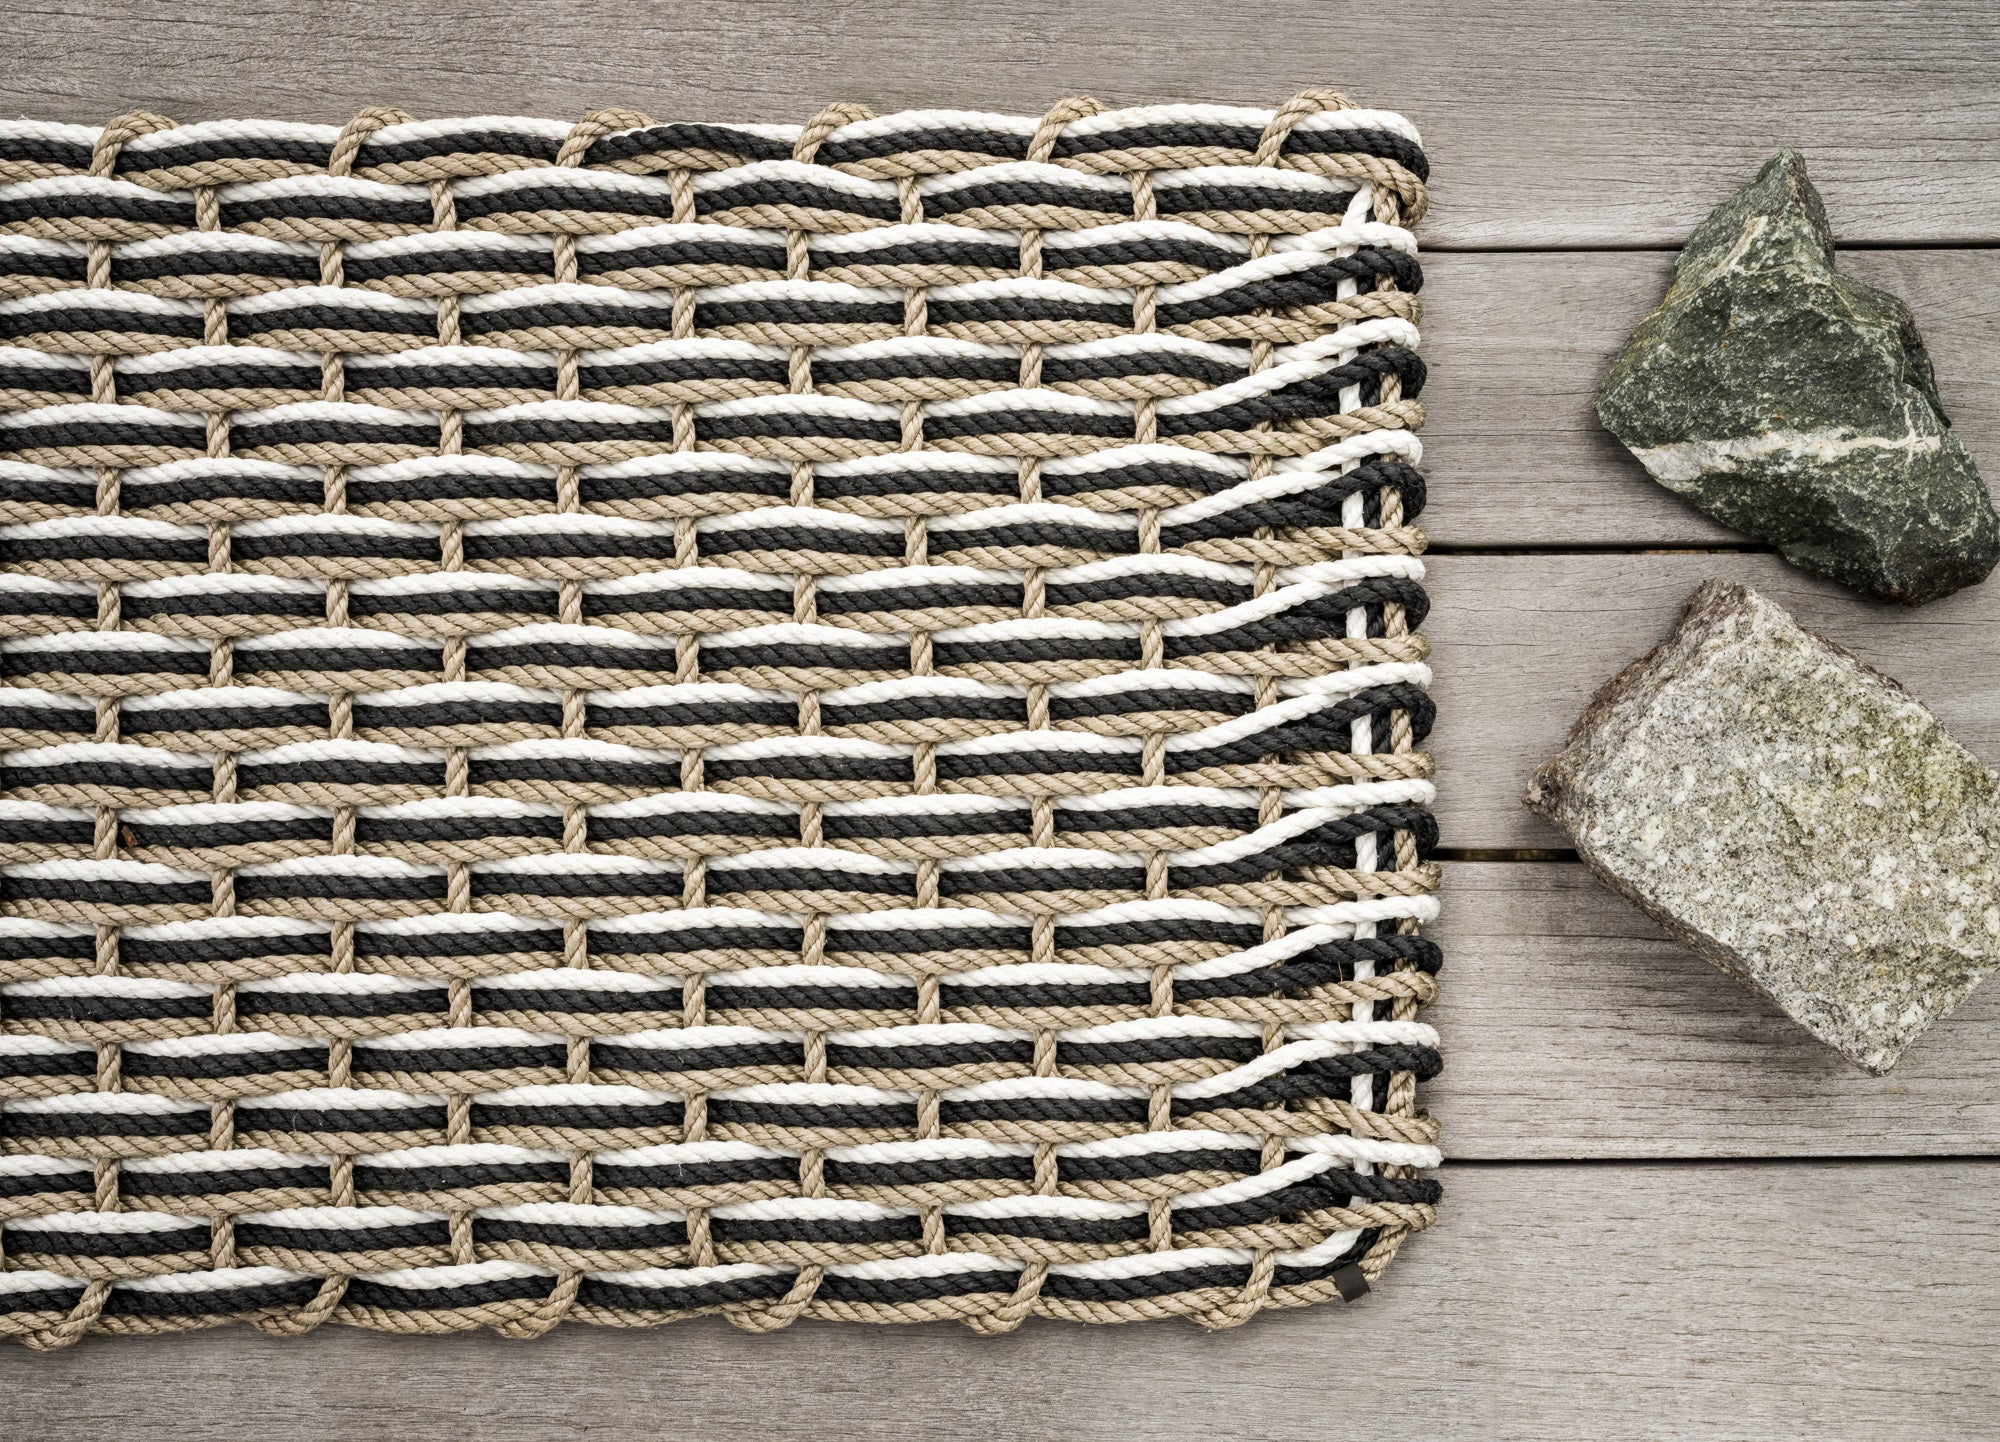 Sand + Charcoal + Pearl Doormat | Woven Lobster Rope Doormats | The Rope Co